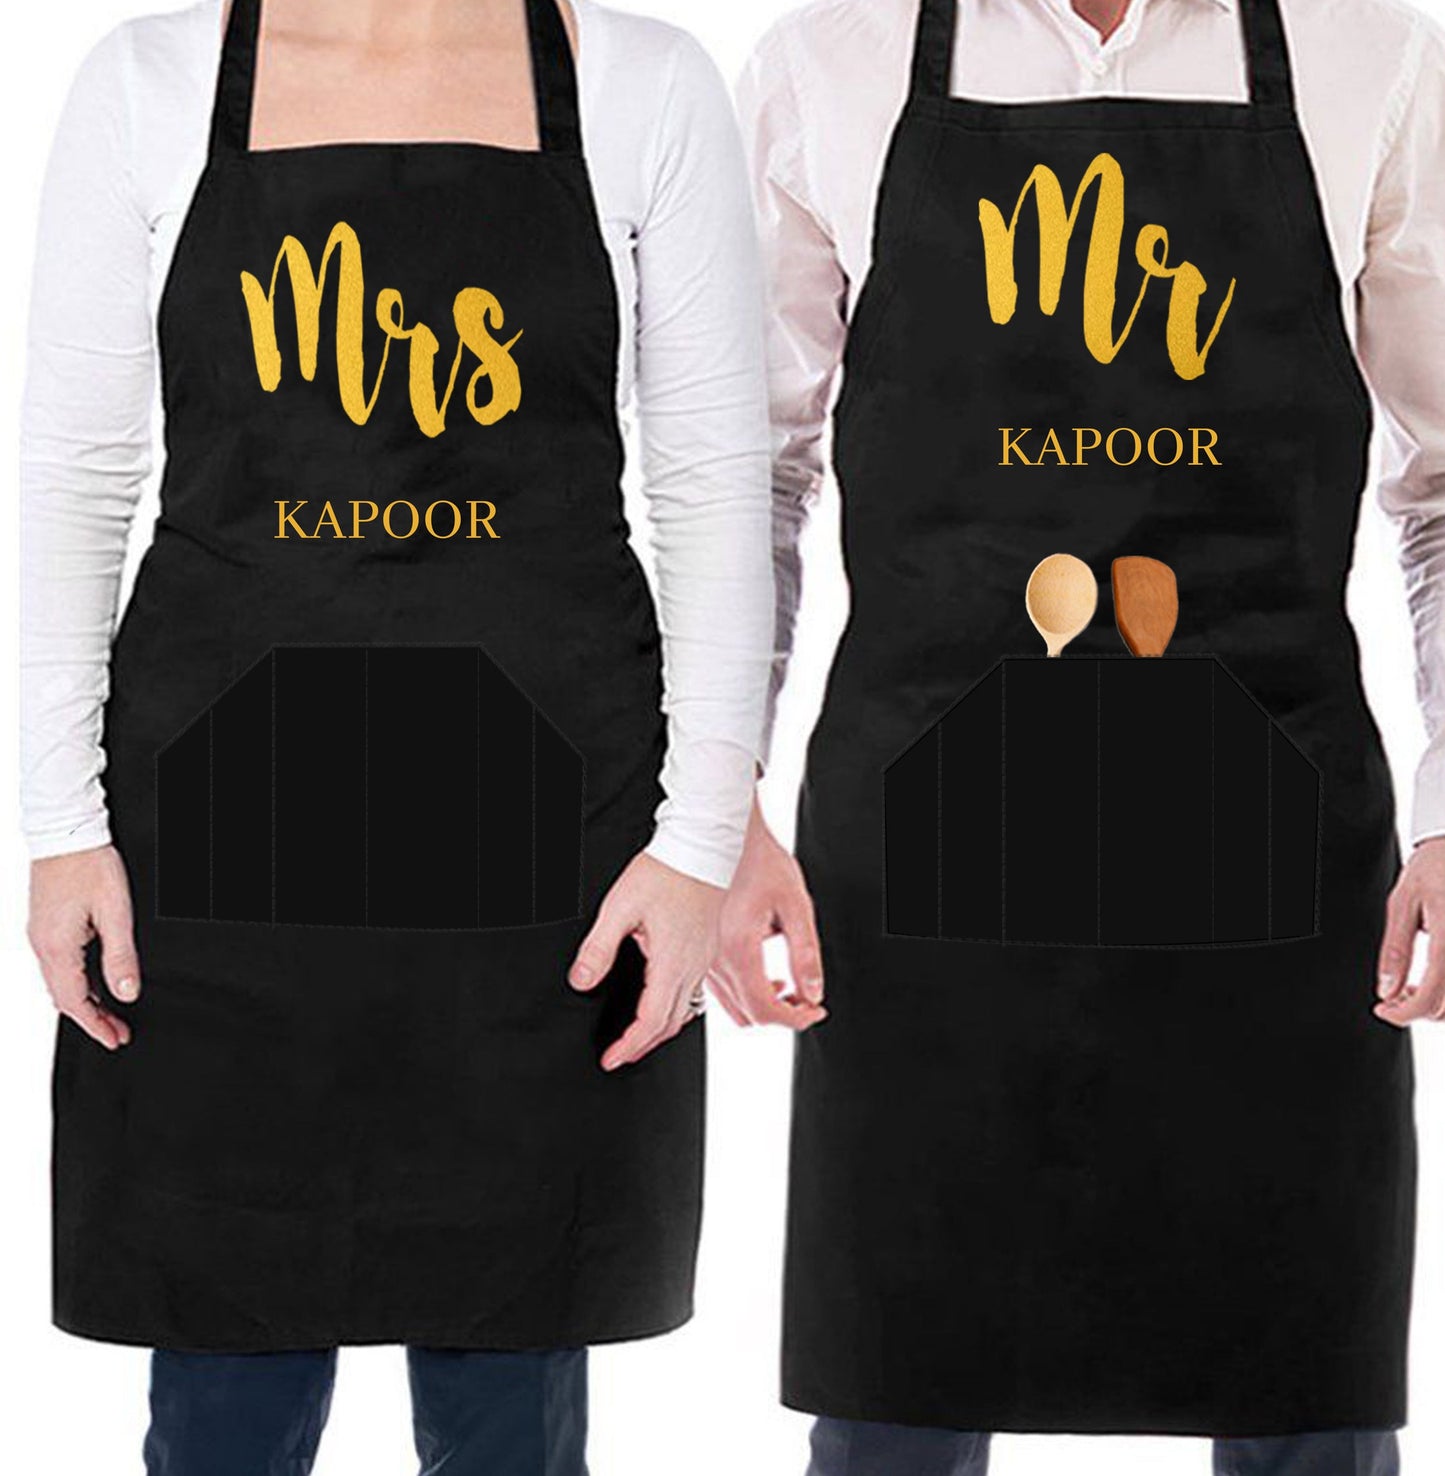 Mr and Mrs Apron Personalised for Kitchen Set of 2 Nutcase